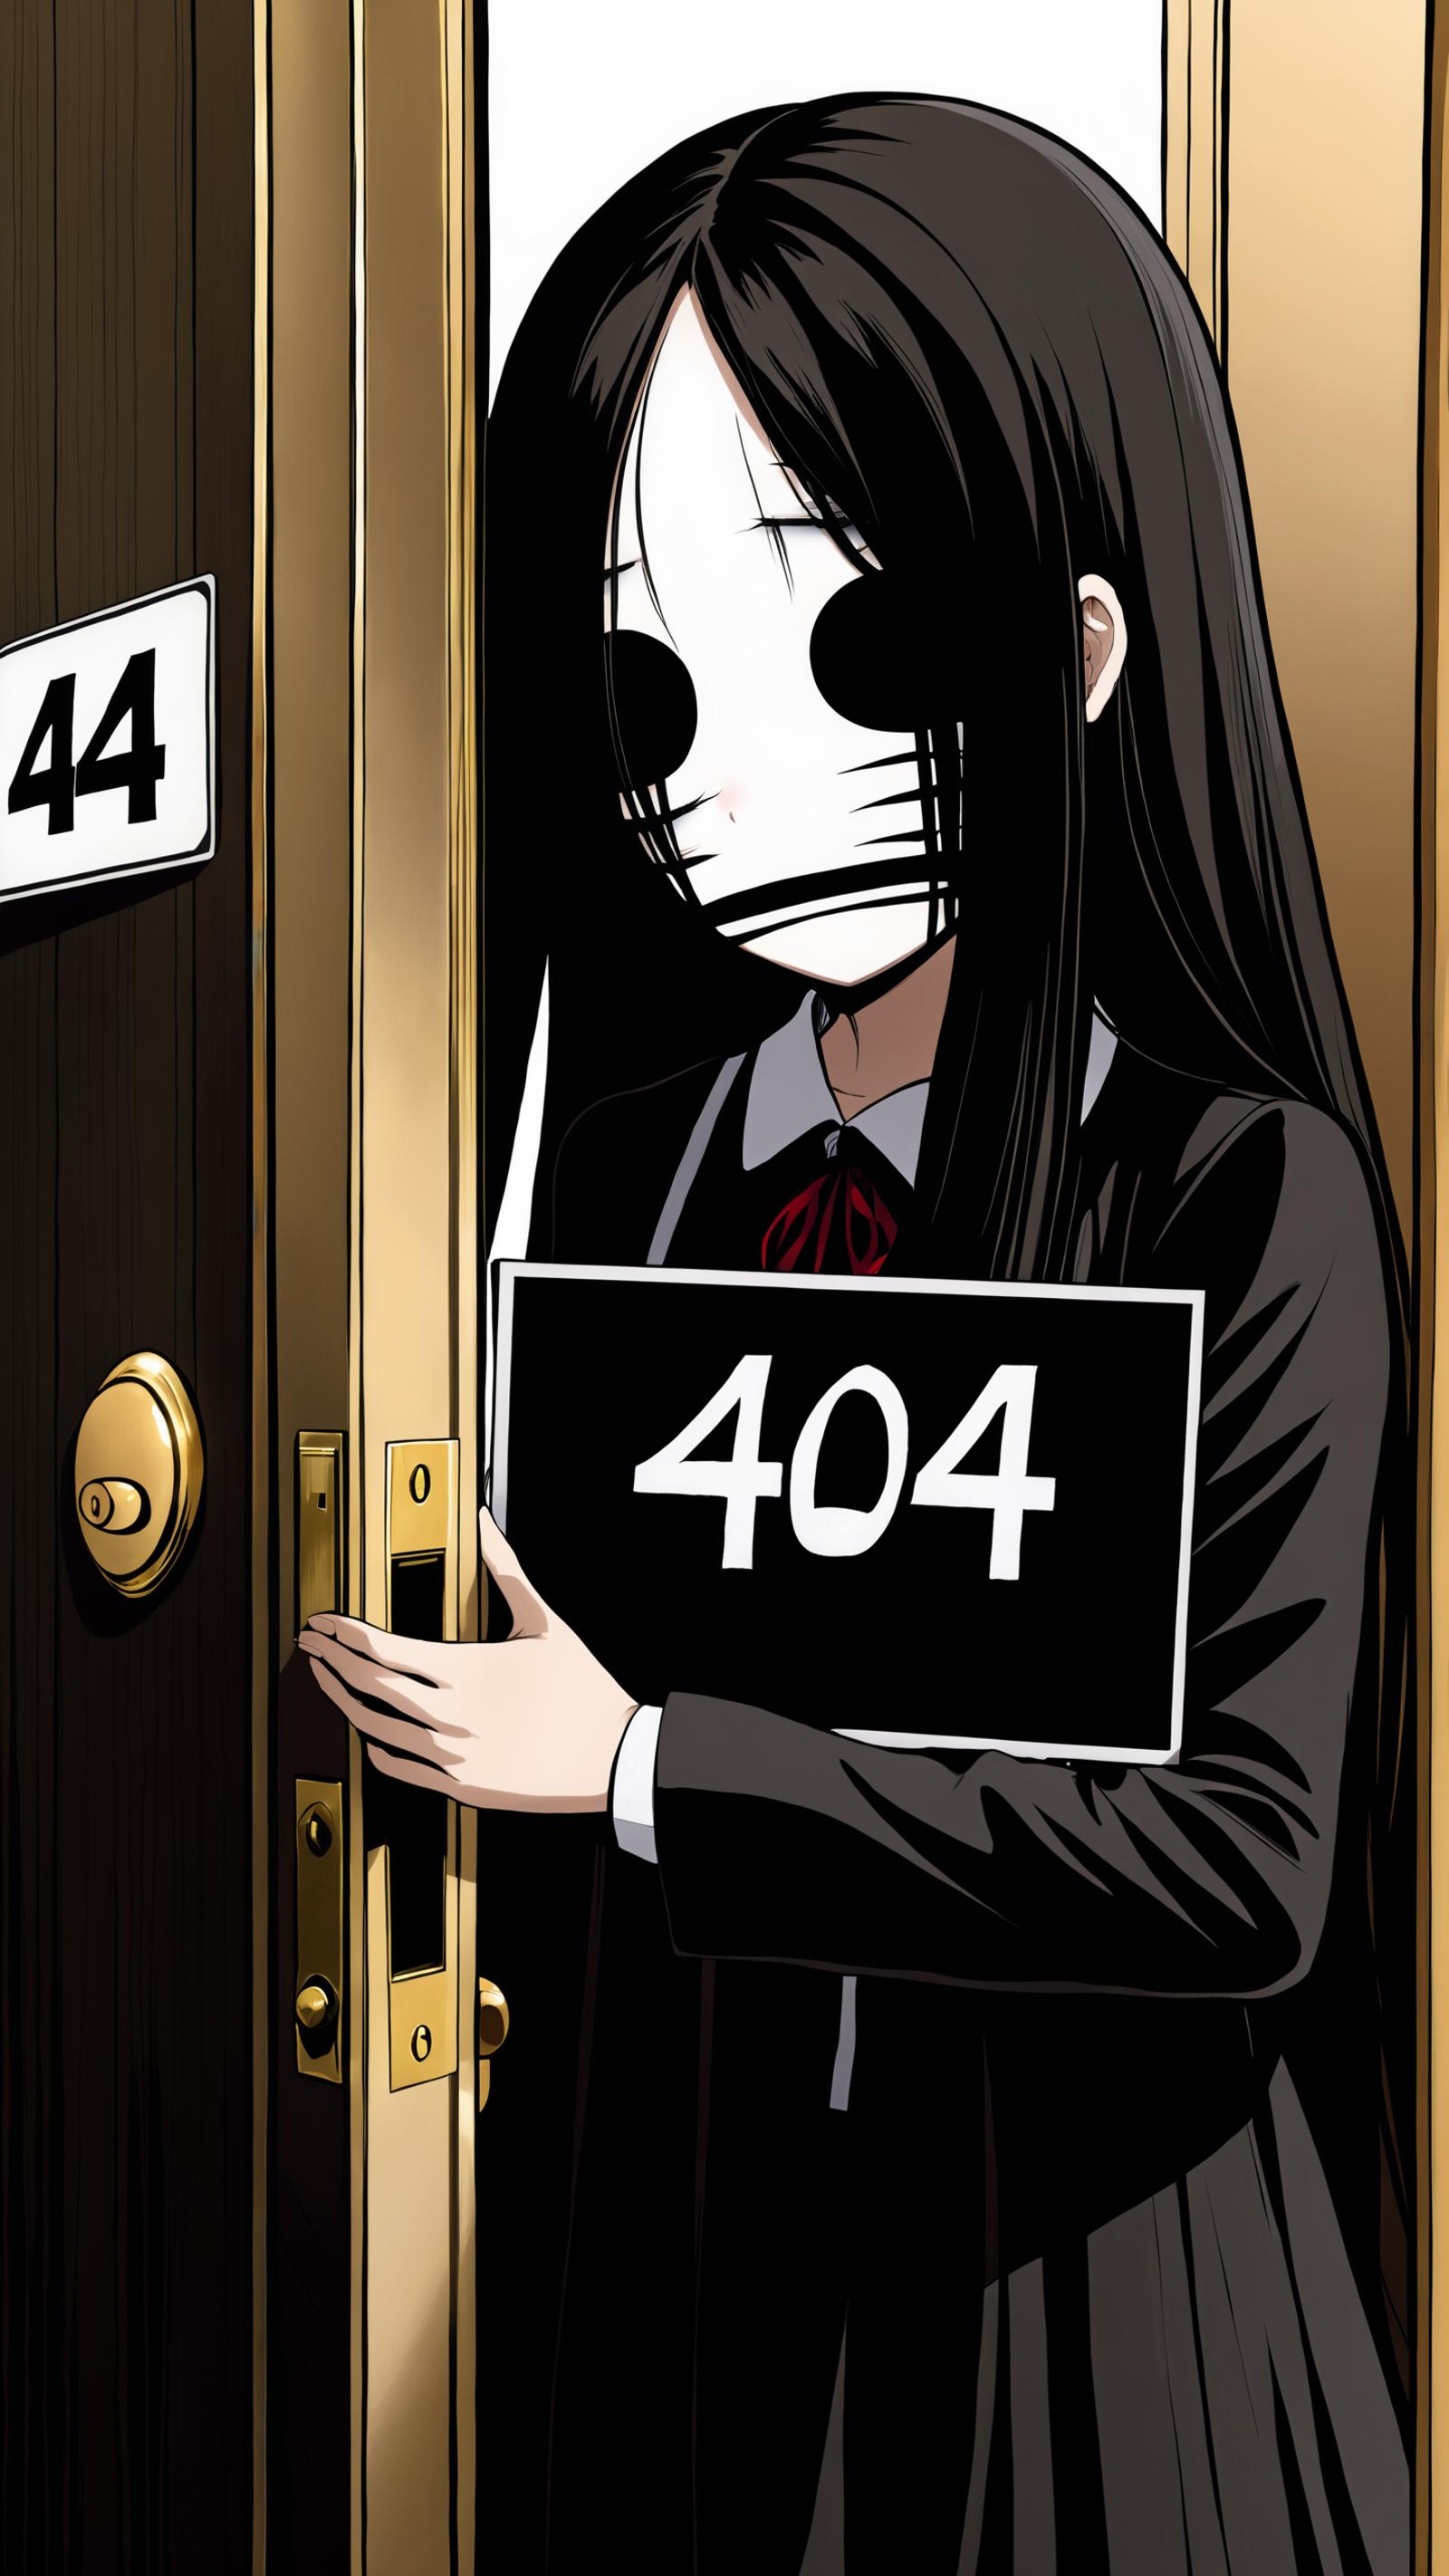 404 Error: A woman holding a "404" sign in front of a door.